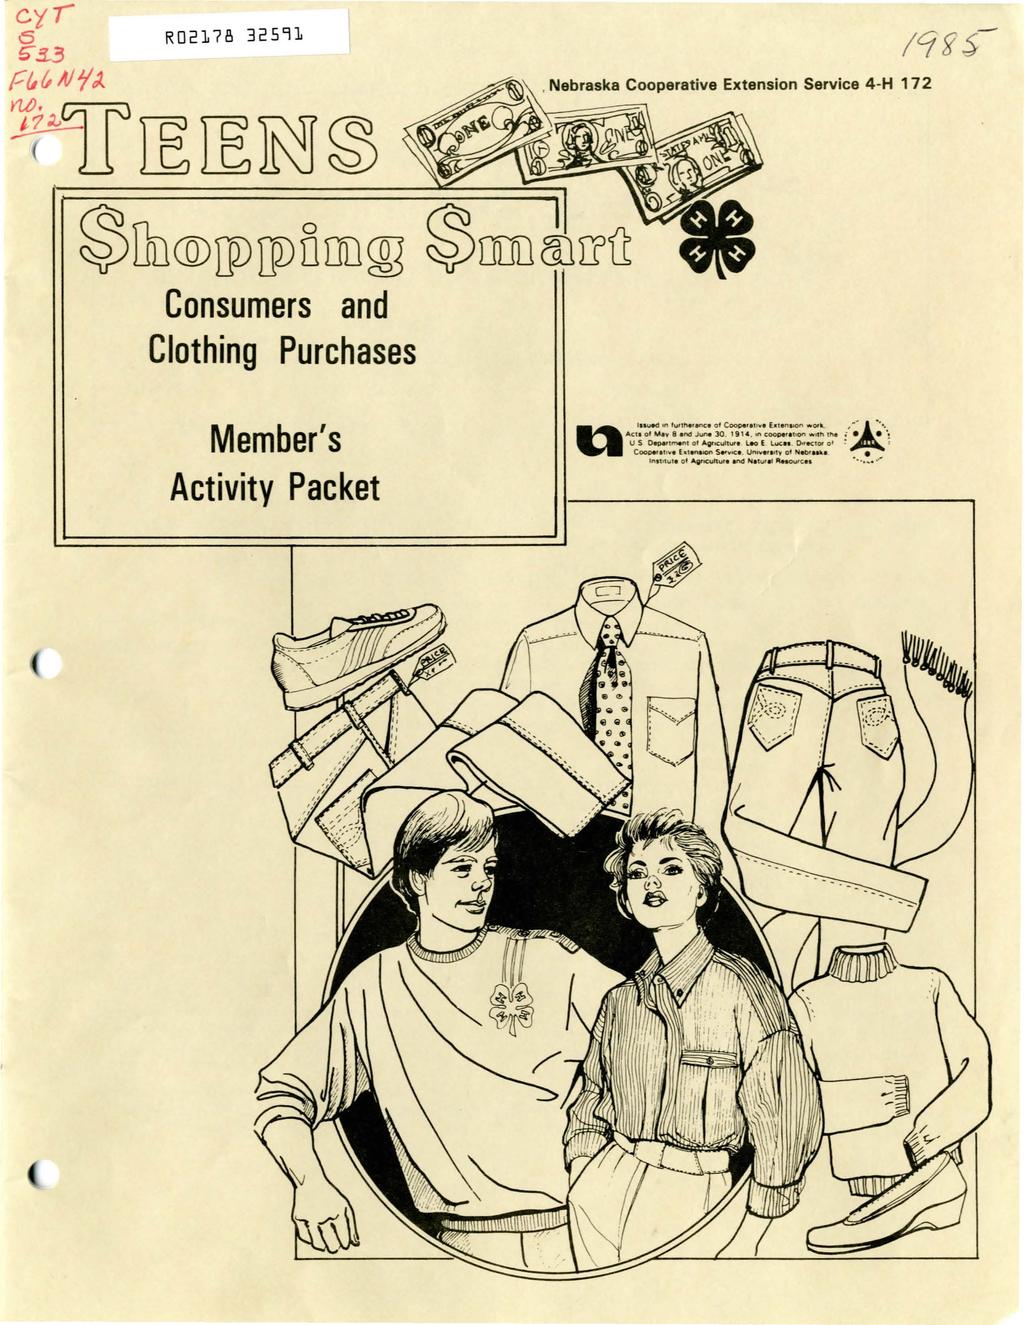 c '/..,- 6 R02178 32591 G"33 F~~N'/J... Nebraska Cooperative Extension Service 4 -H 1 7 2 ~1riEIE~~ ~ild TIDTIDfiDD@ Consumers and Clothing Purchases ~ DOD Member's Activity Packet a 11111"' '" lunn.